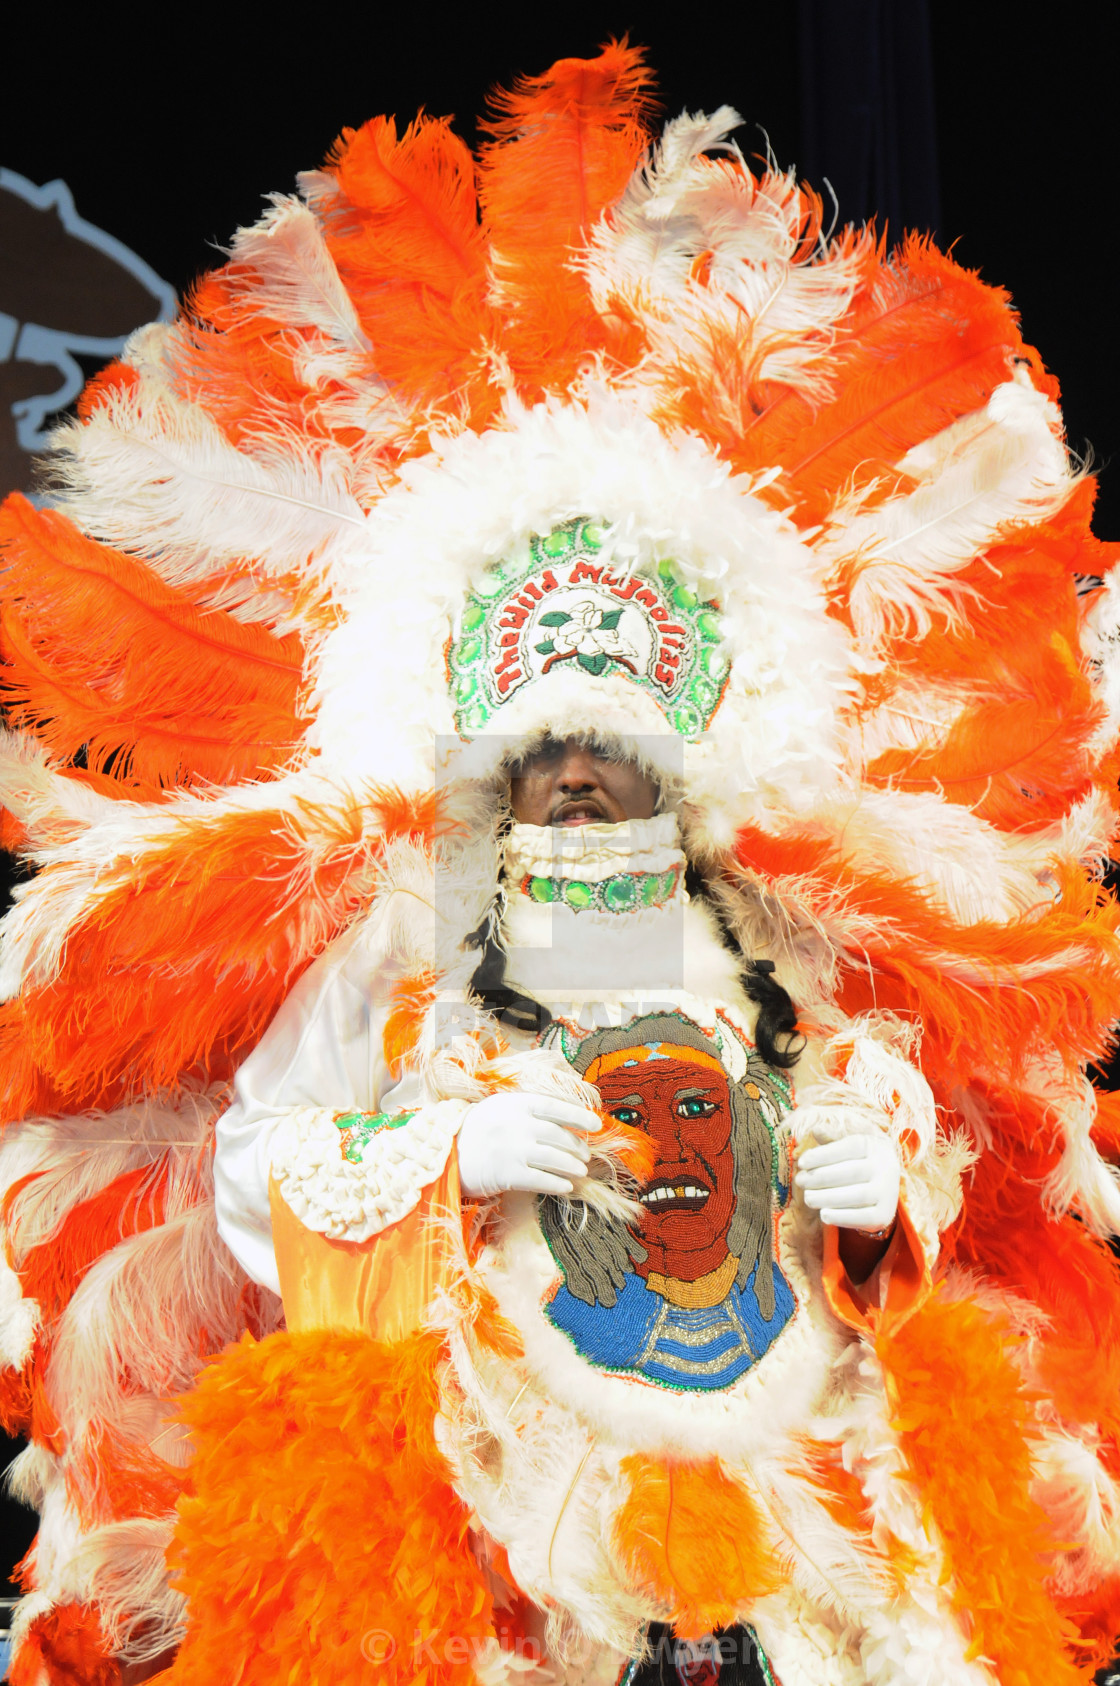 "Mardi Gras Indian, New Orleans" stock image